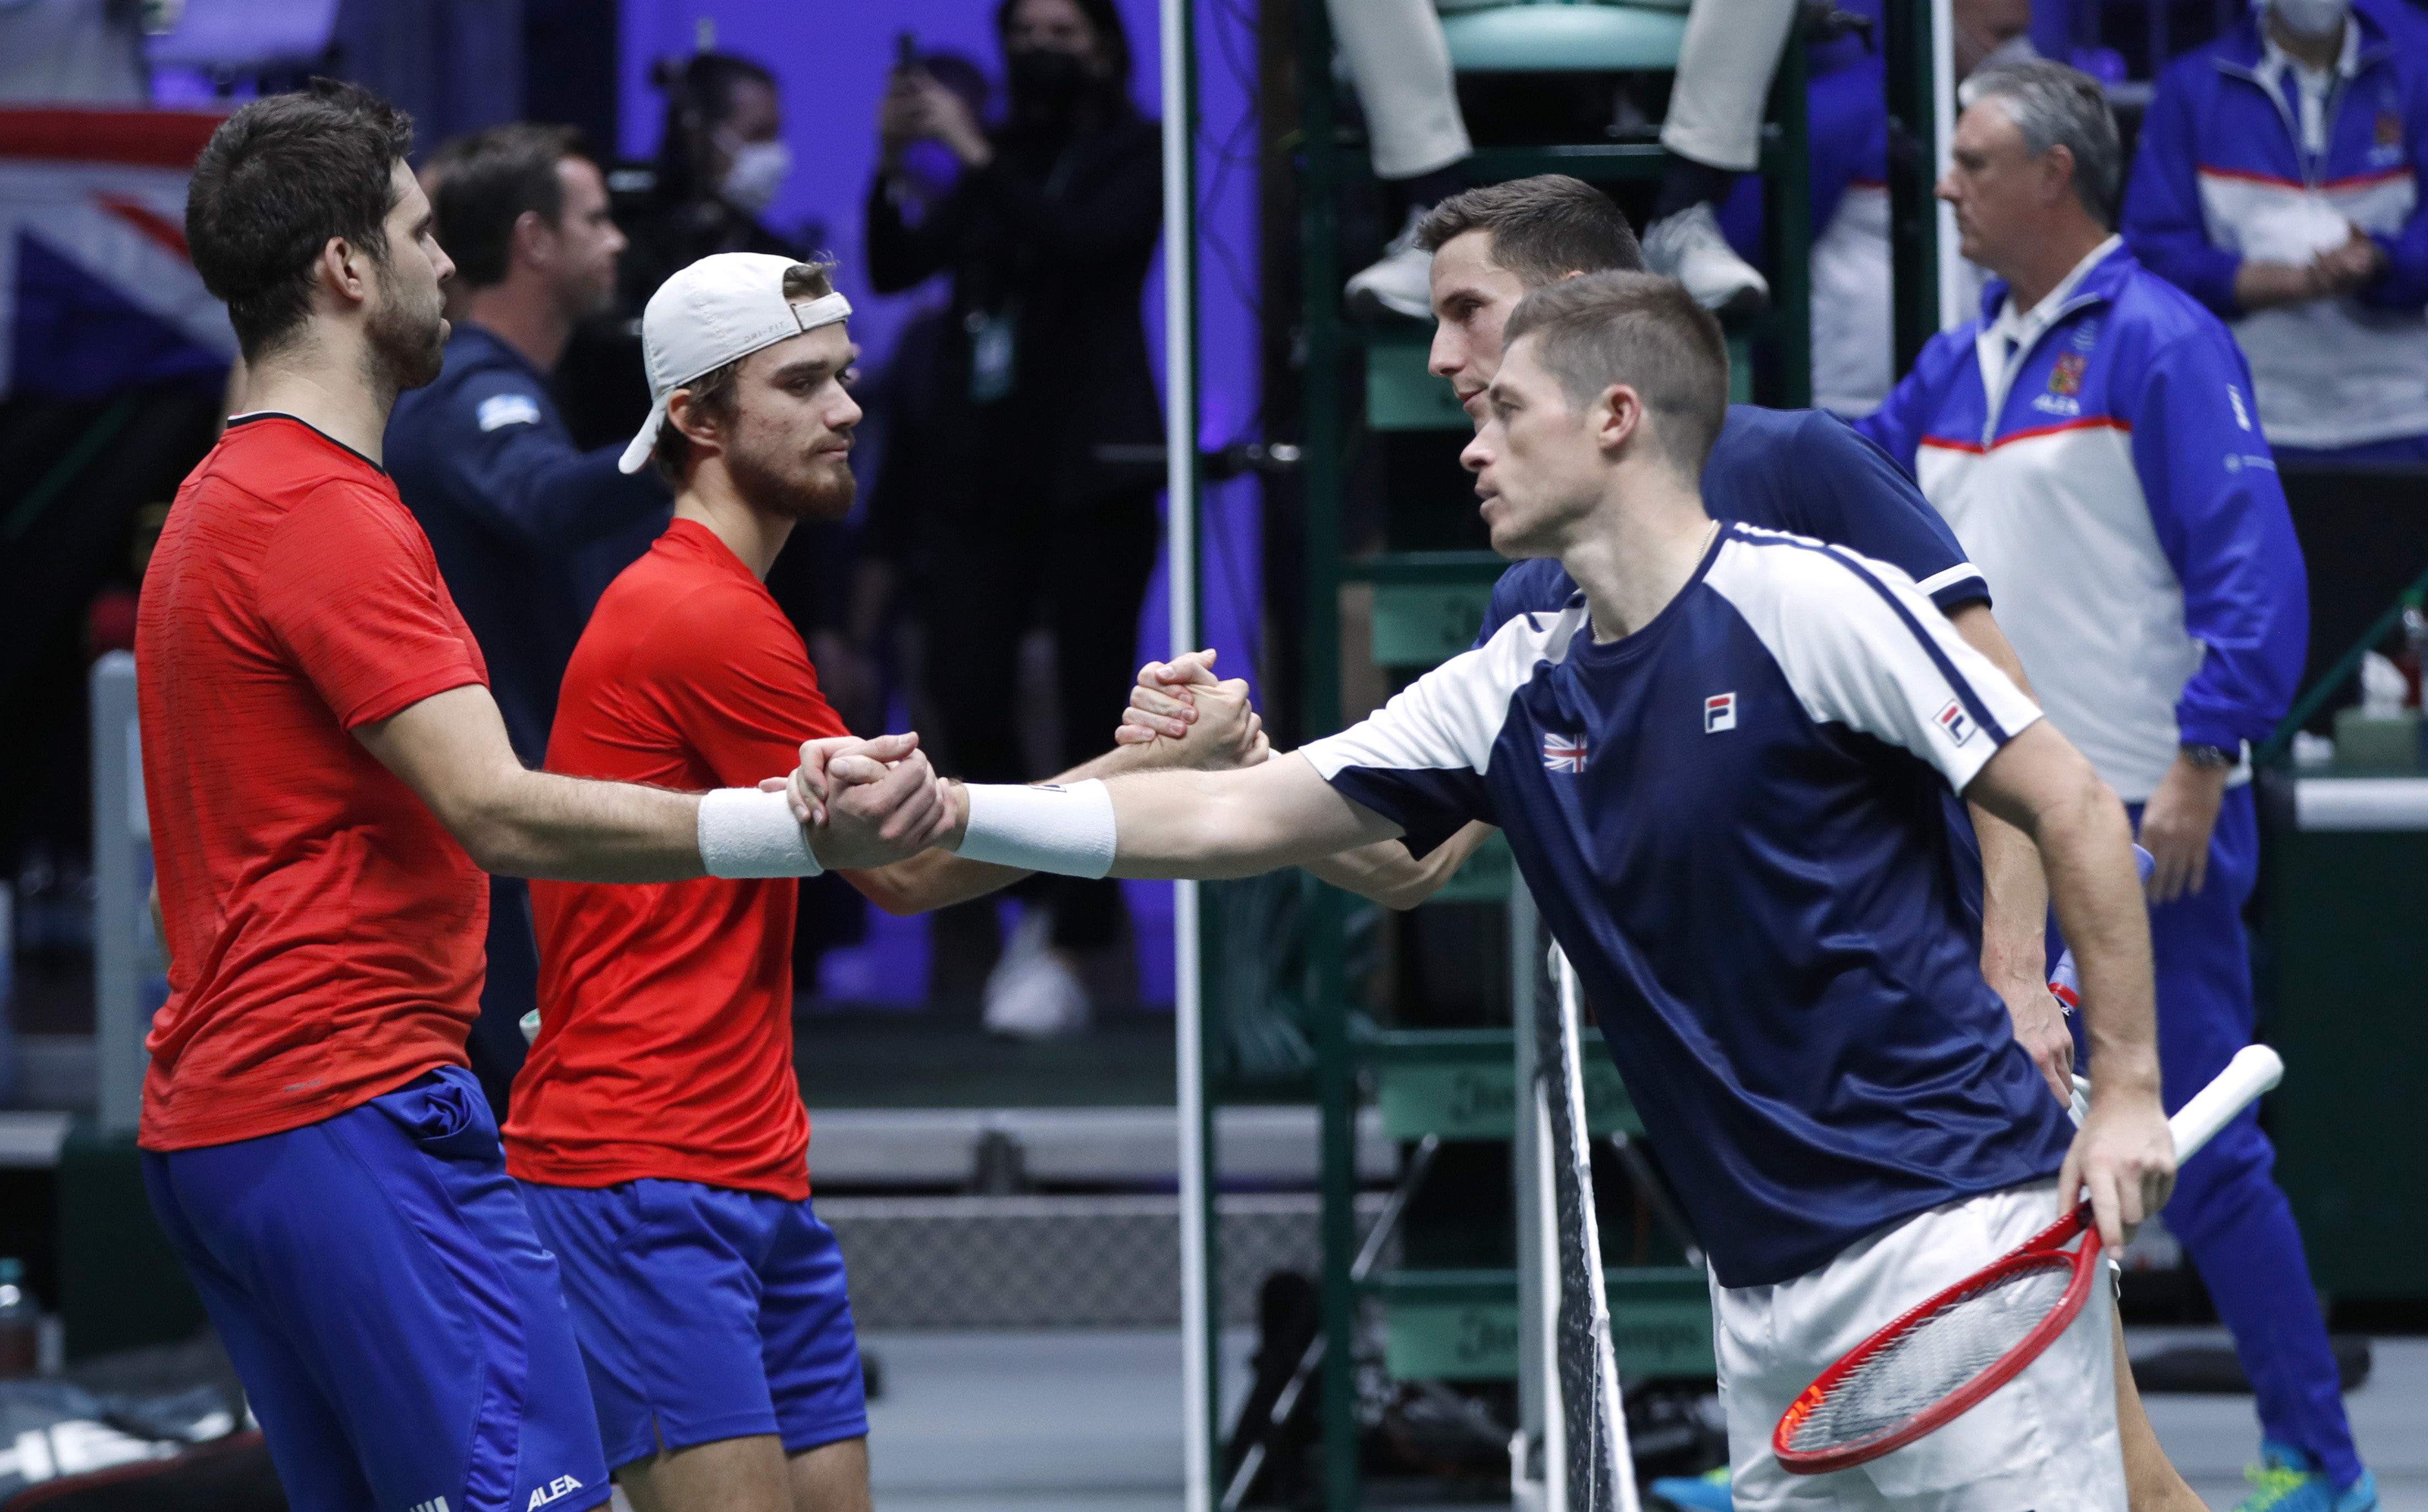 Tennis - Davis Cup Finals - Group C - Britain v Czech Republic - Olympiahalle, Innsbruck, Austria - November 28, 2021 Britain's Joe Salisbury and Neal Skupski shakes hands with Czech Republic's Tomas Machac and Jiri Vesely after winning their doubles match REUTERS/Leonhard Foeger